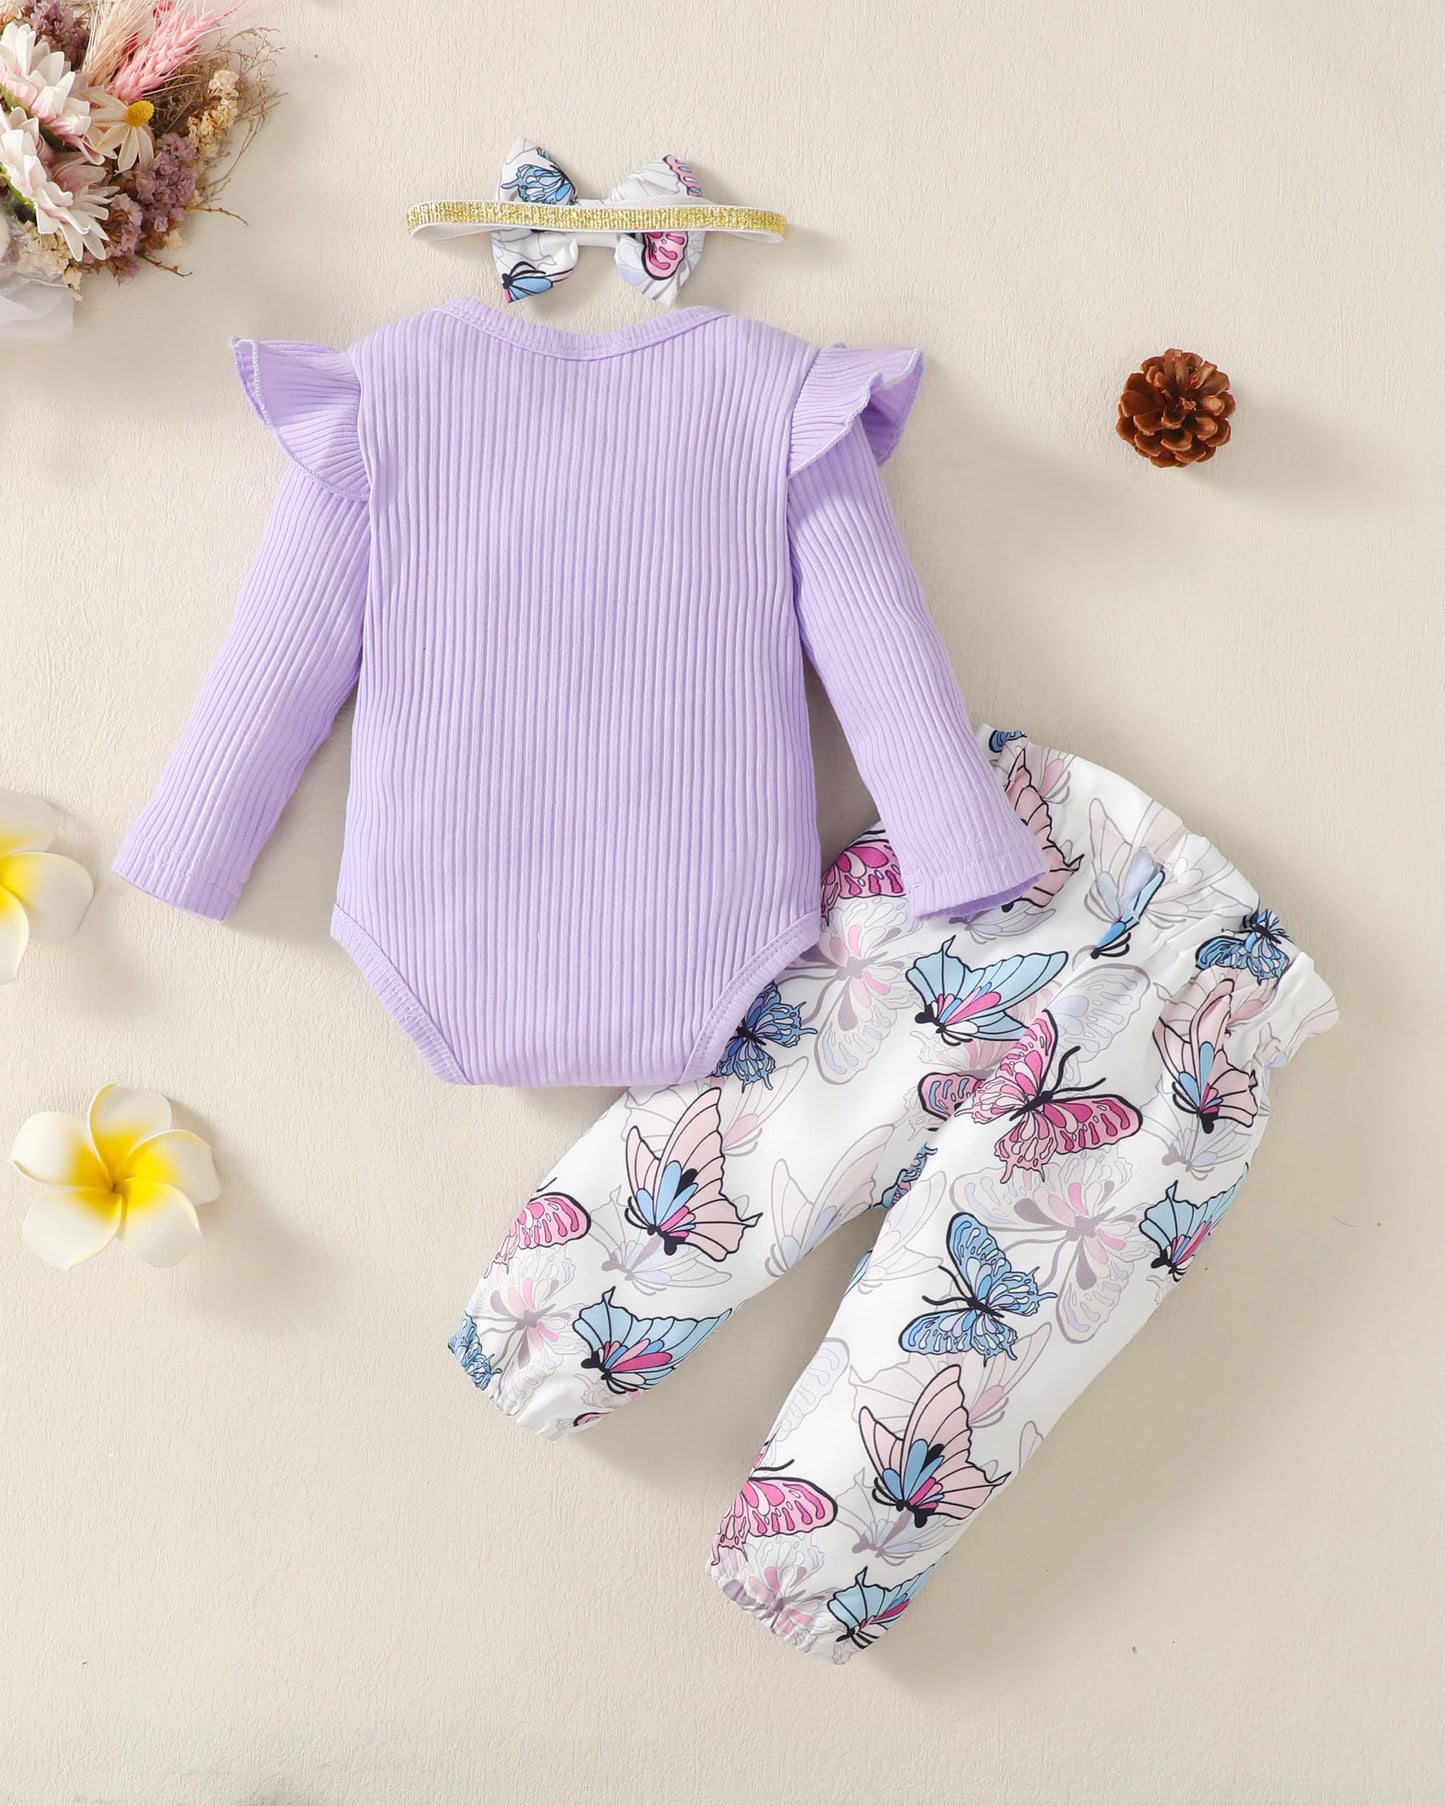 Newborn Baby Girl Clothes Fall Winter Infant Girl Outfits Ruffle Long Sleeve Ribbed Romper Top Long Floral Pants Clothes Sets 3-6 Months